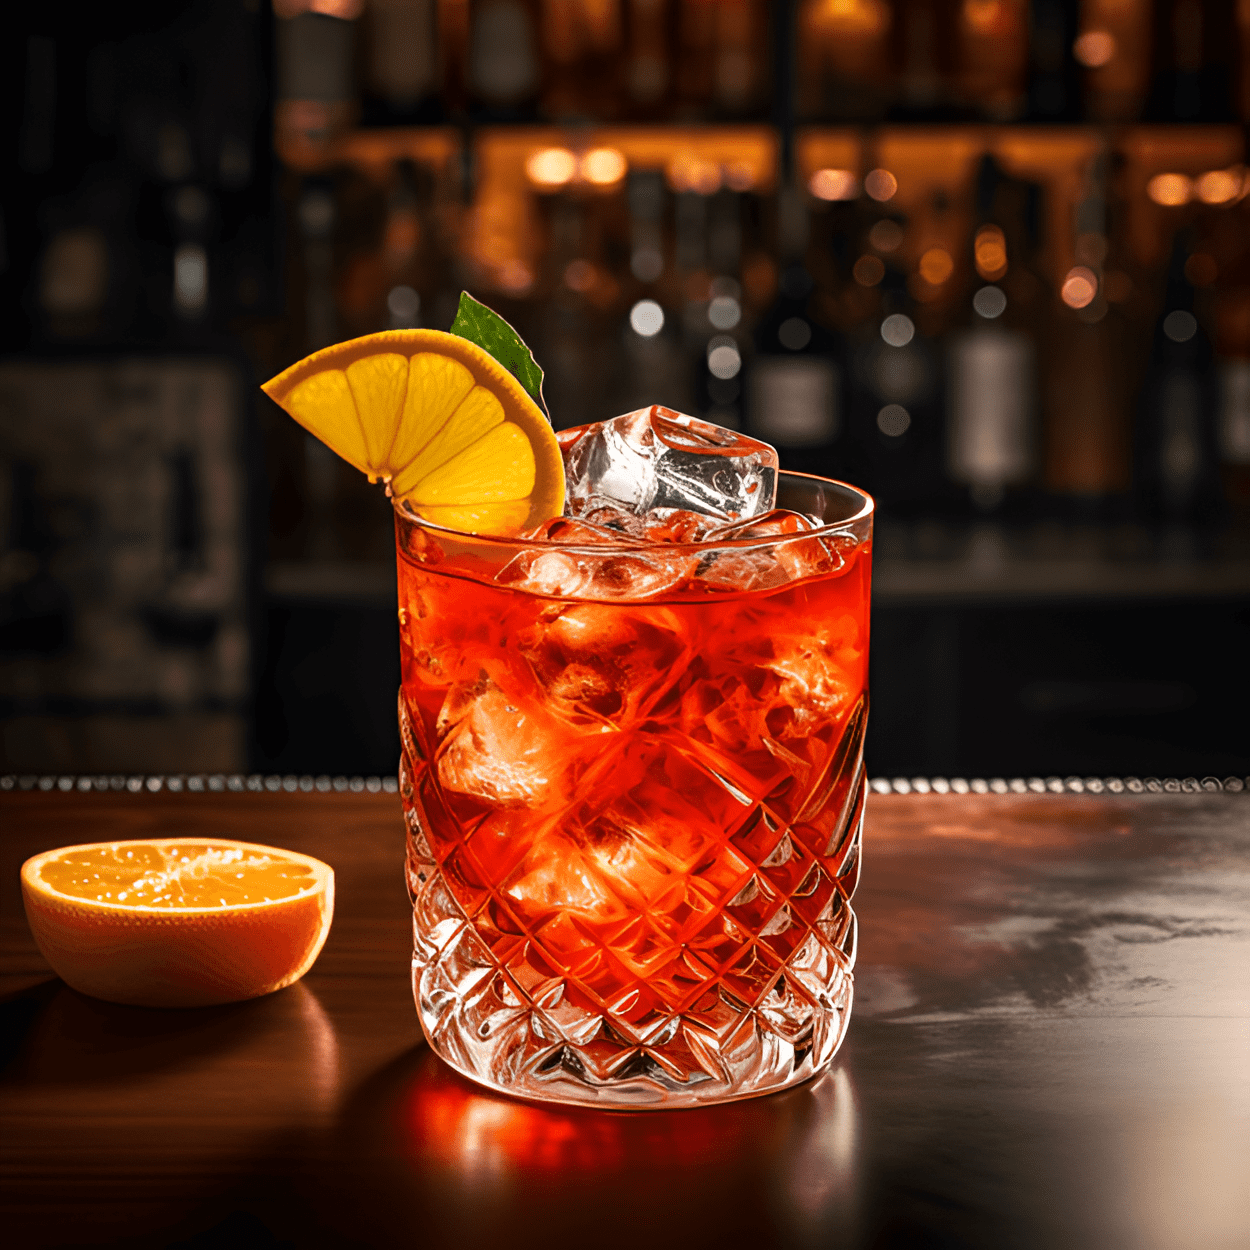 Campari and Soda Cocktail Recipe - The Campari and Soda cocktail is known for its bitter, herbal taste with a hint of sweetness. It is a refreshing and effervescent drink, with a slightly tart and citrusy undertone.